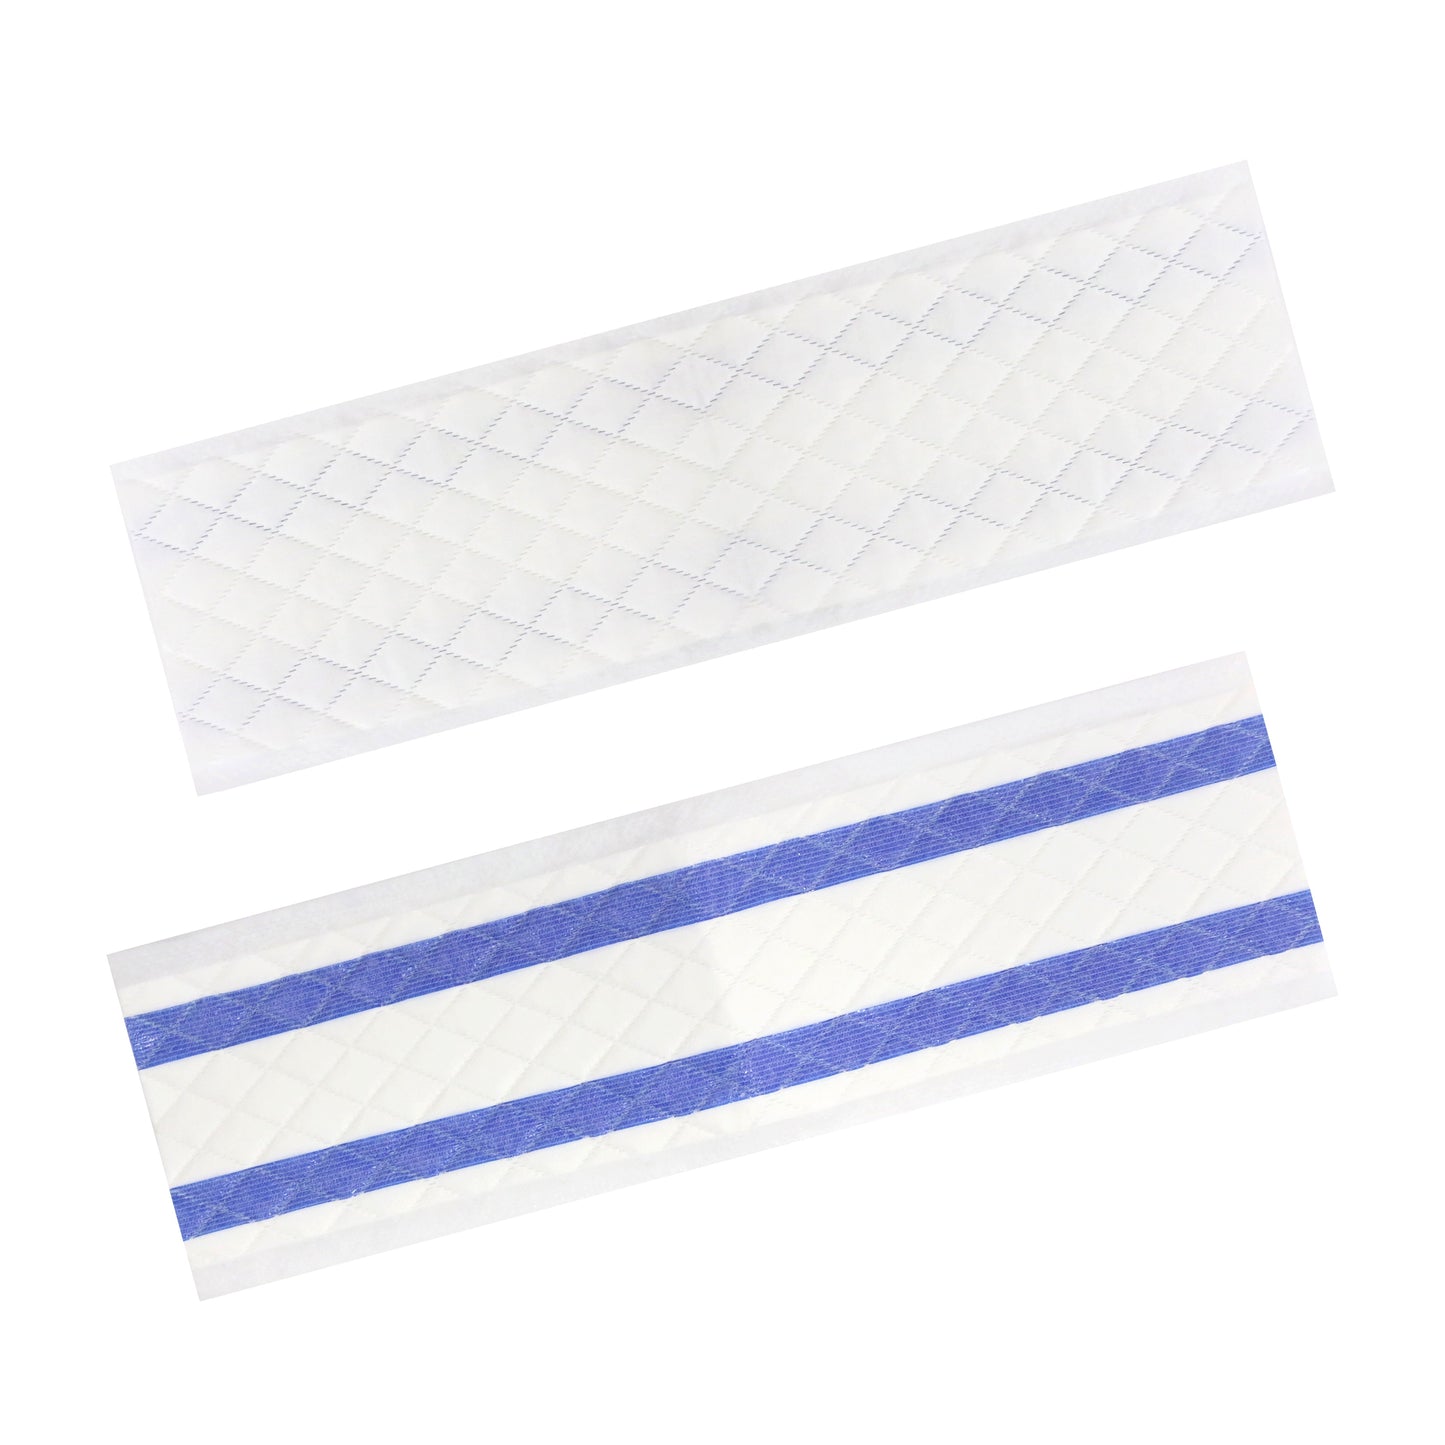 Unger Disposable Mop Pad - Pack of 50 pads DMWS2